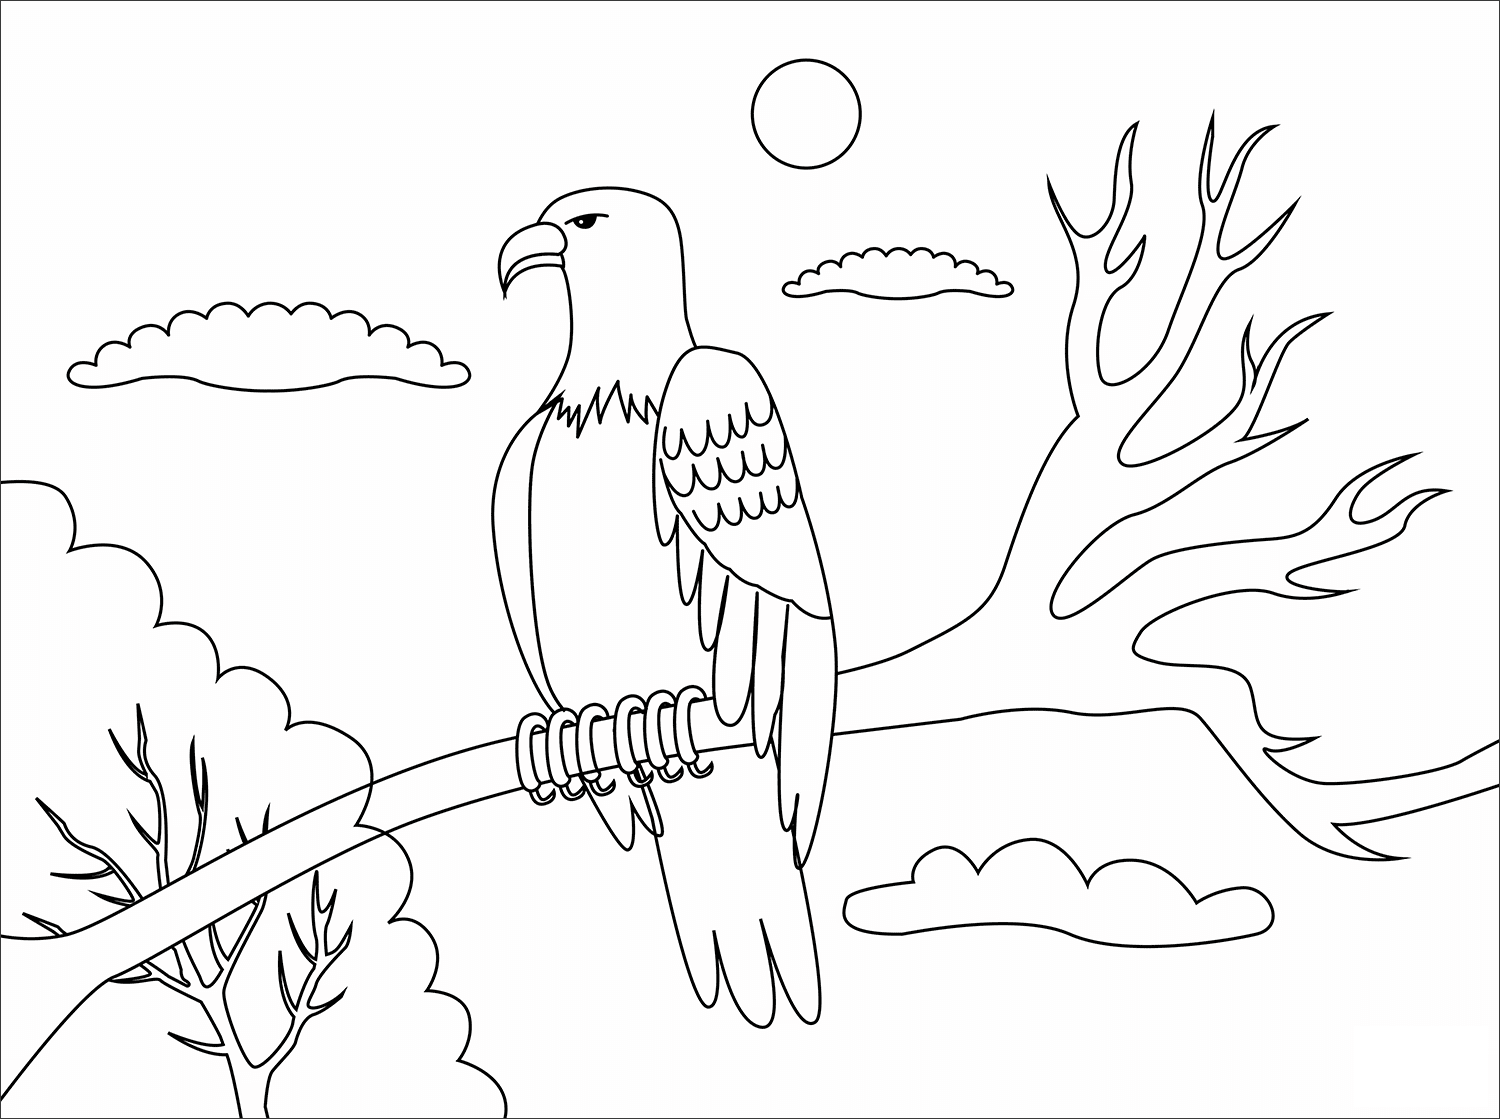 Bald Eagle Animal Simple Coloring Page